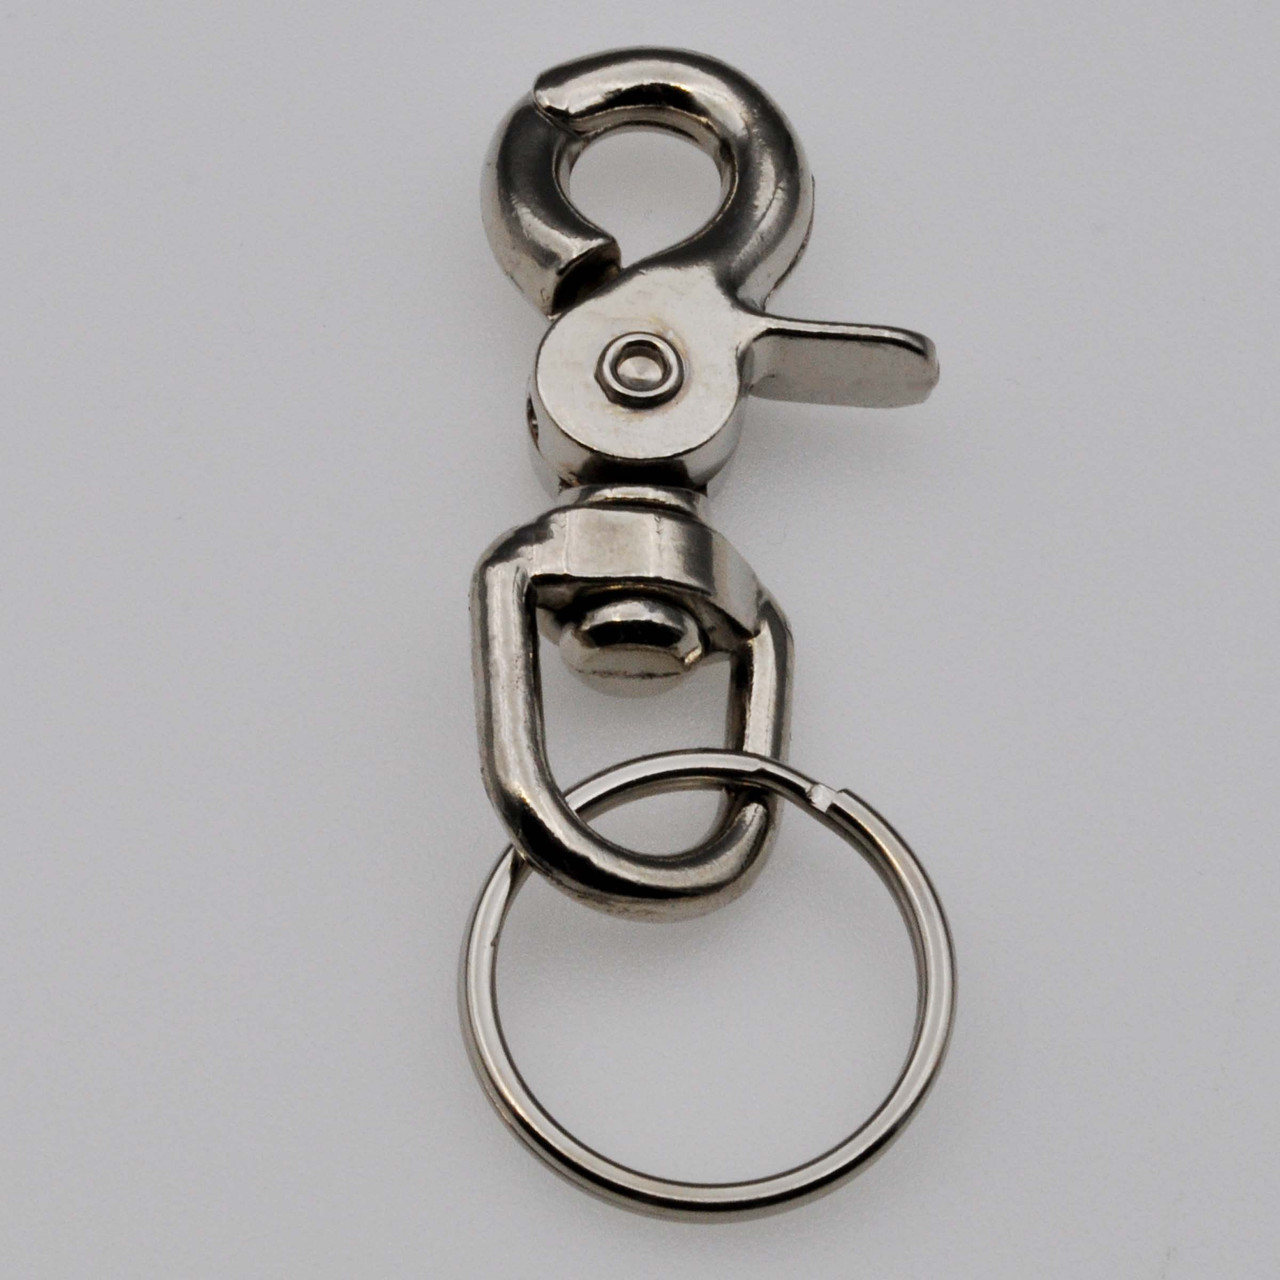 Shop for and Buy Heavy Duty Trigger Snap Clip Key Ring Nickel Plated at  . Large selection and bulk discounts available.